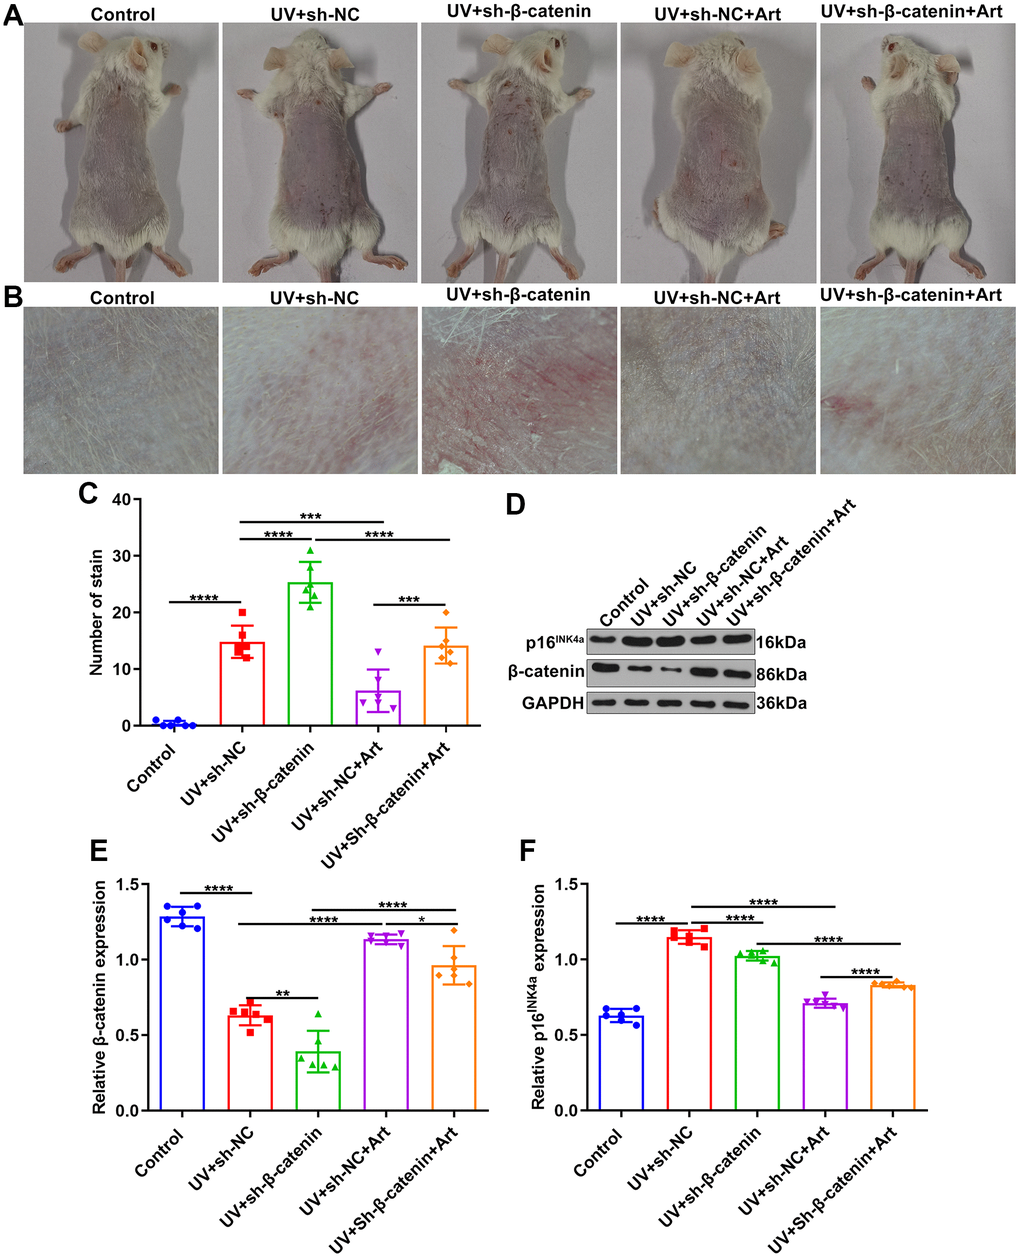 The effects of Art treatment and silencing β-catenin expression on UVB-irradiated skin photoaging of mice. (A, B) Clinical and dermoscopic observations of the back skin of mice in control group, UV + sh-NC group, UV + sh-β-catenin group, UV + sh-NC + Art group and UV + sh-β-catenin + Art group. (C) Quantification of the number of stains in skin tissue of mice from each group. (D–F) Western blot of the expression of β-catenin and p16INK4a in skin tissues of mice. *p